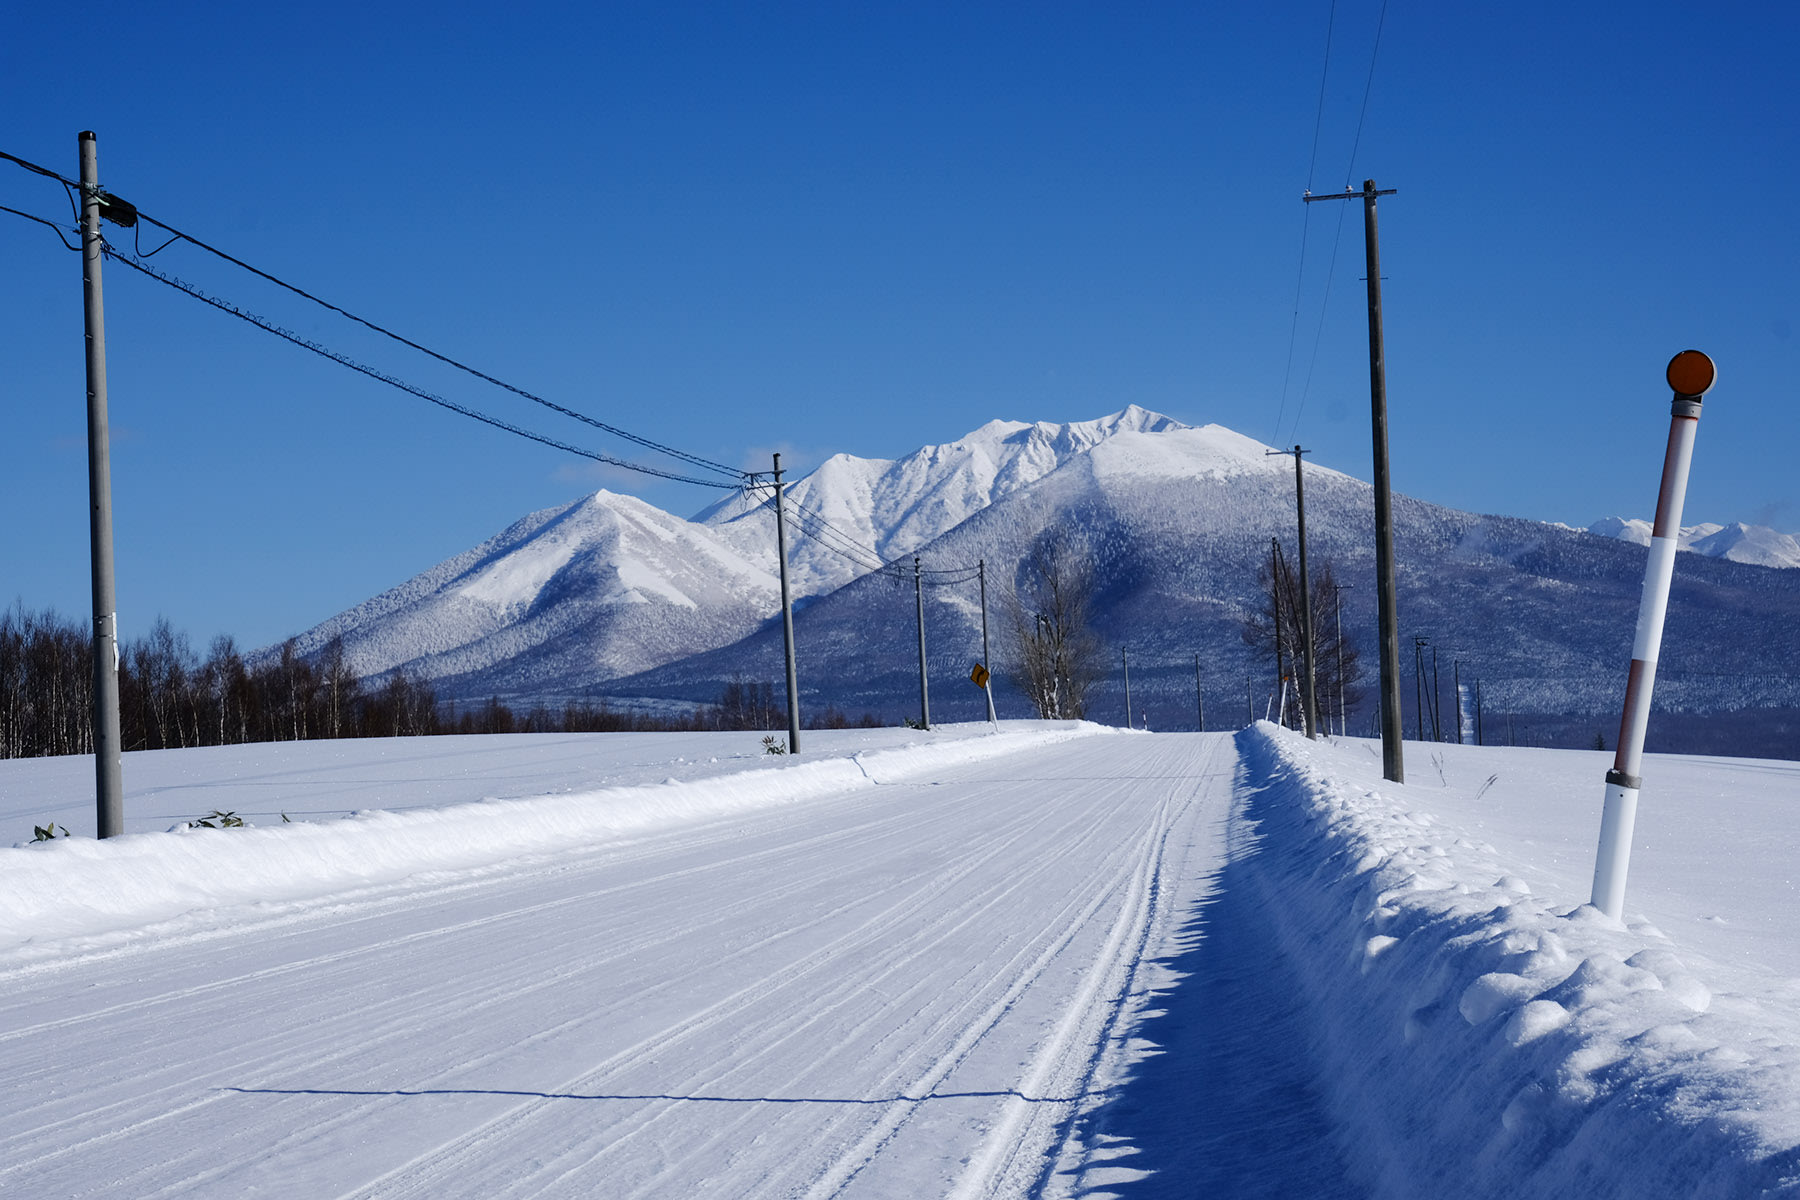 A road is pictured covered in white snow on a clear winters day. A white mountain peak rises above the plains in the background